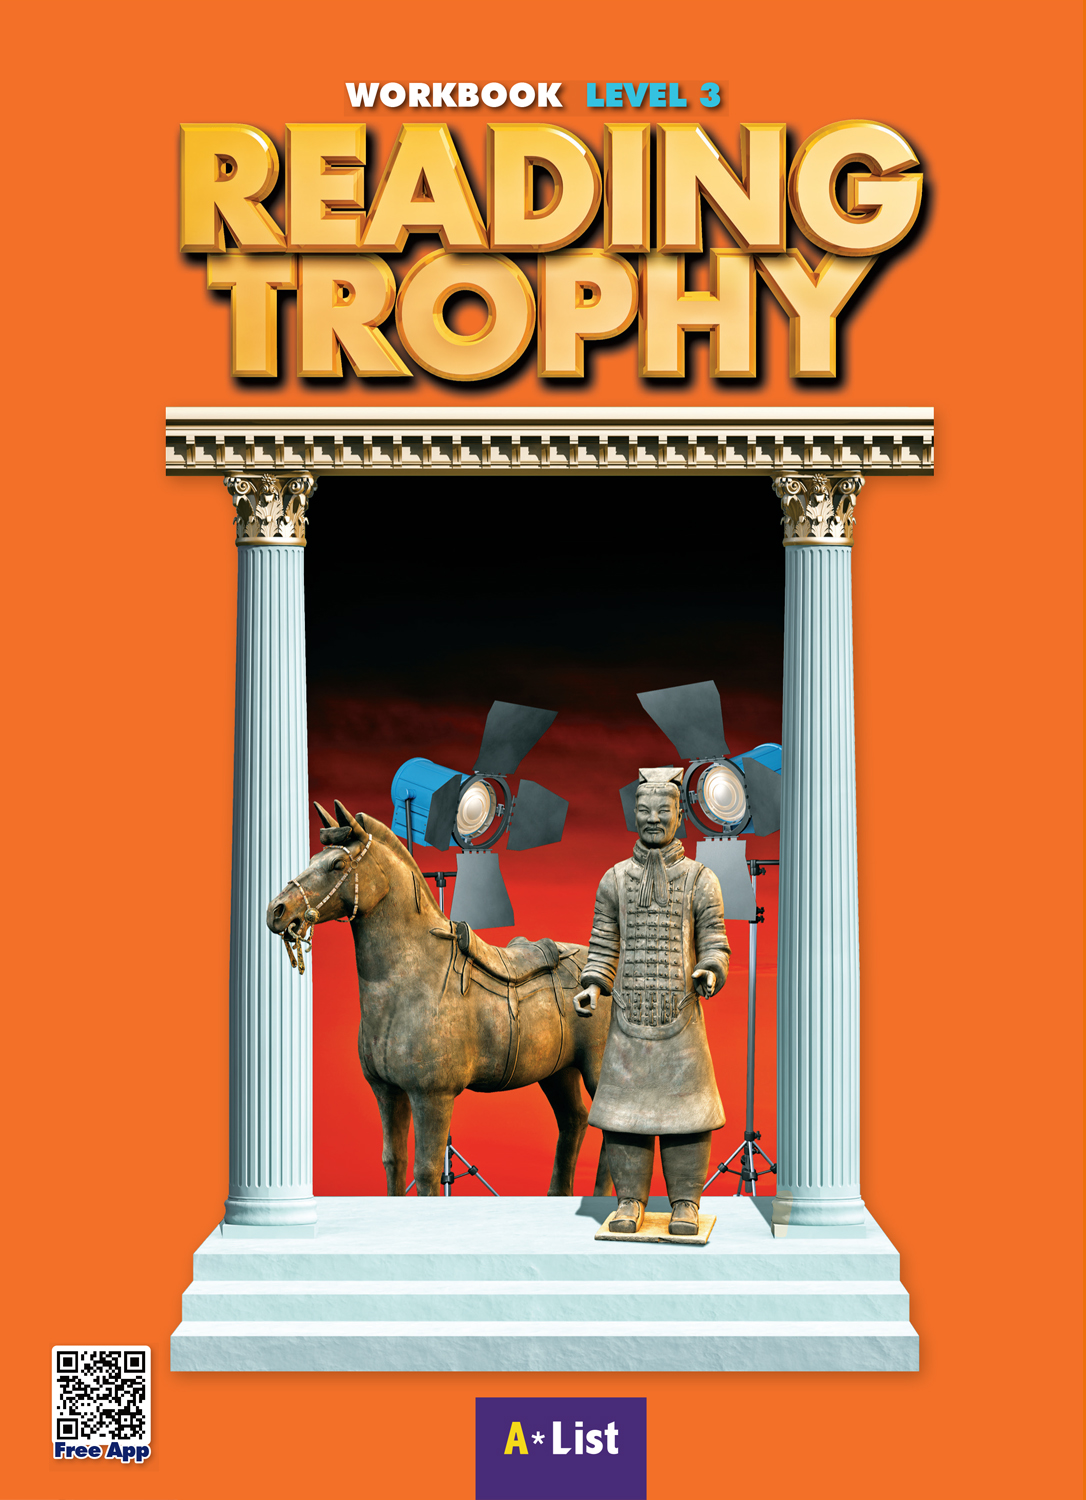 Reading Trophy 3 WB with App